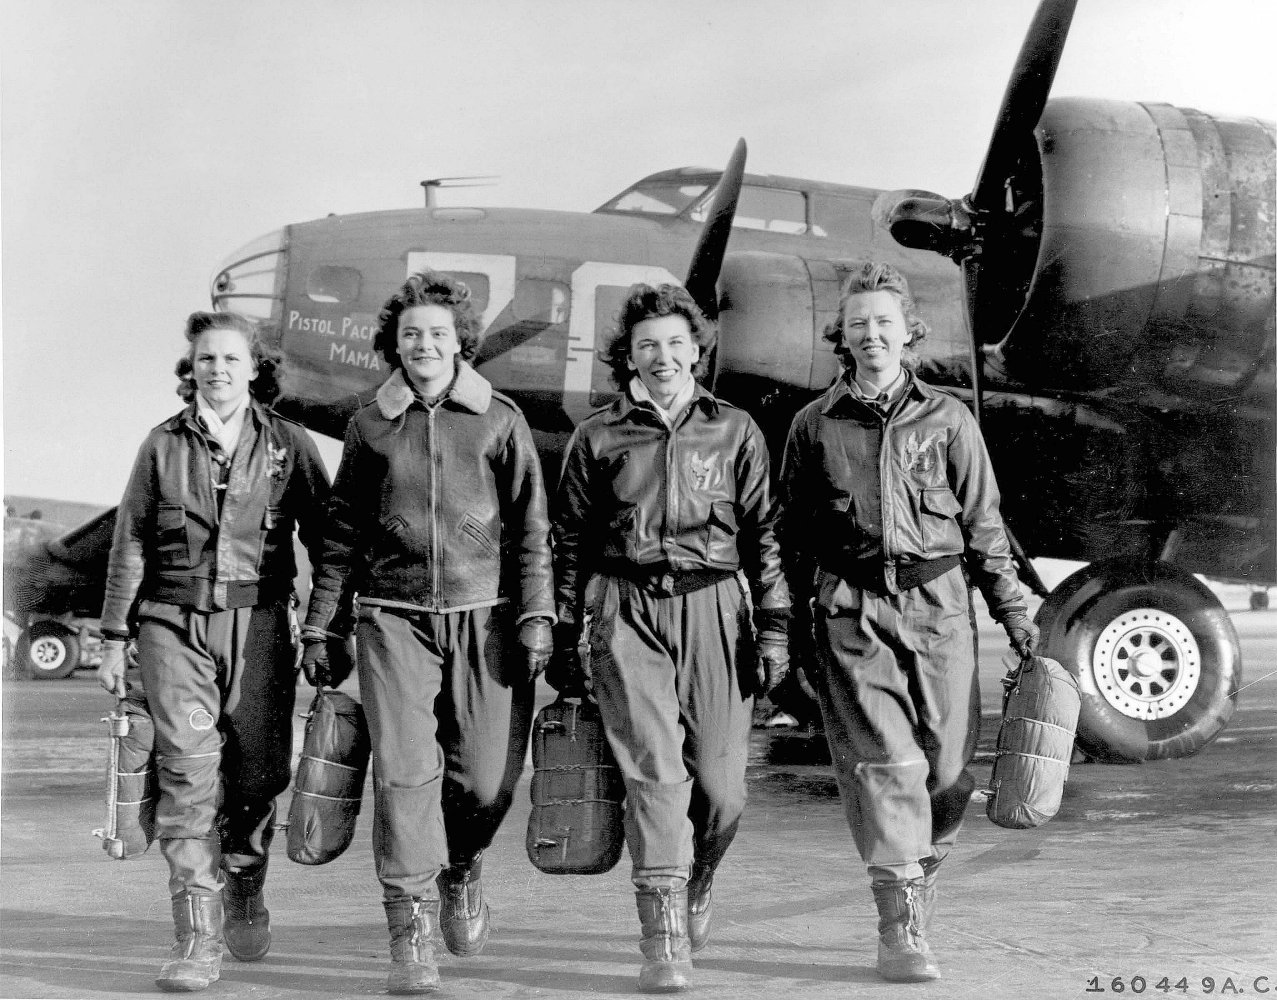 Group of Women Airforce Service Pilots and B-17 Flying Fortress Google image from http://upload.wikimedia.org/wikipedia/commons/a/aa/Group_of_Women_Airforce_Service_Pilots_and_B-17_Flying_Fortress.jpg